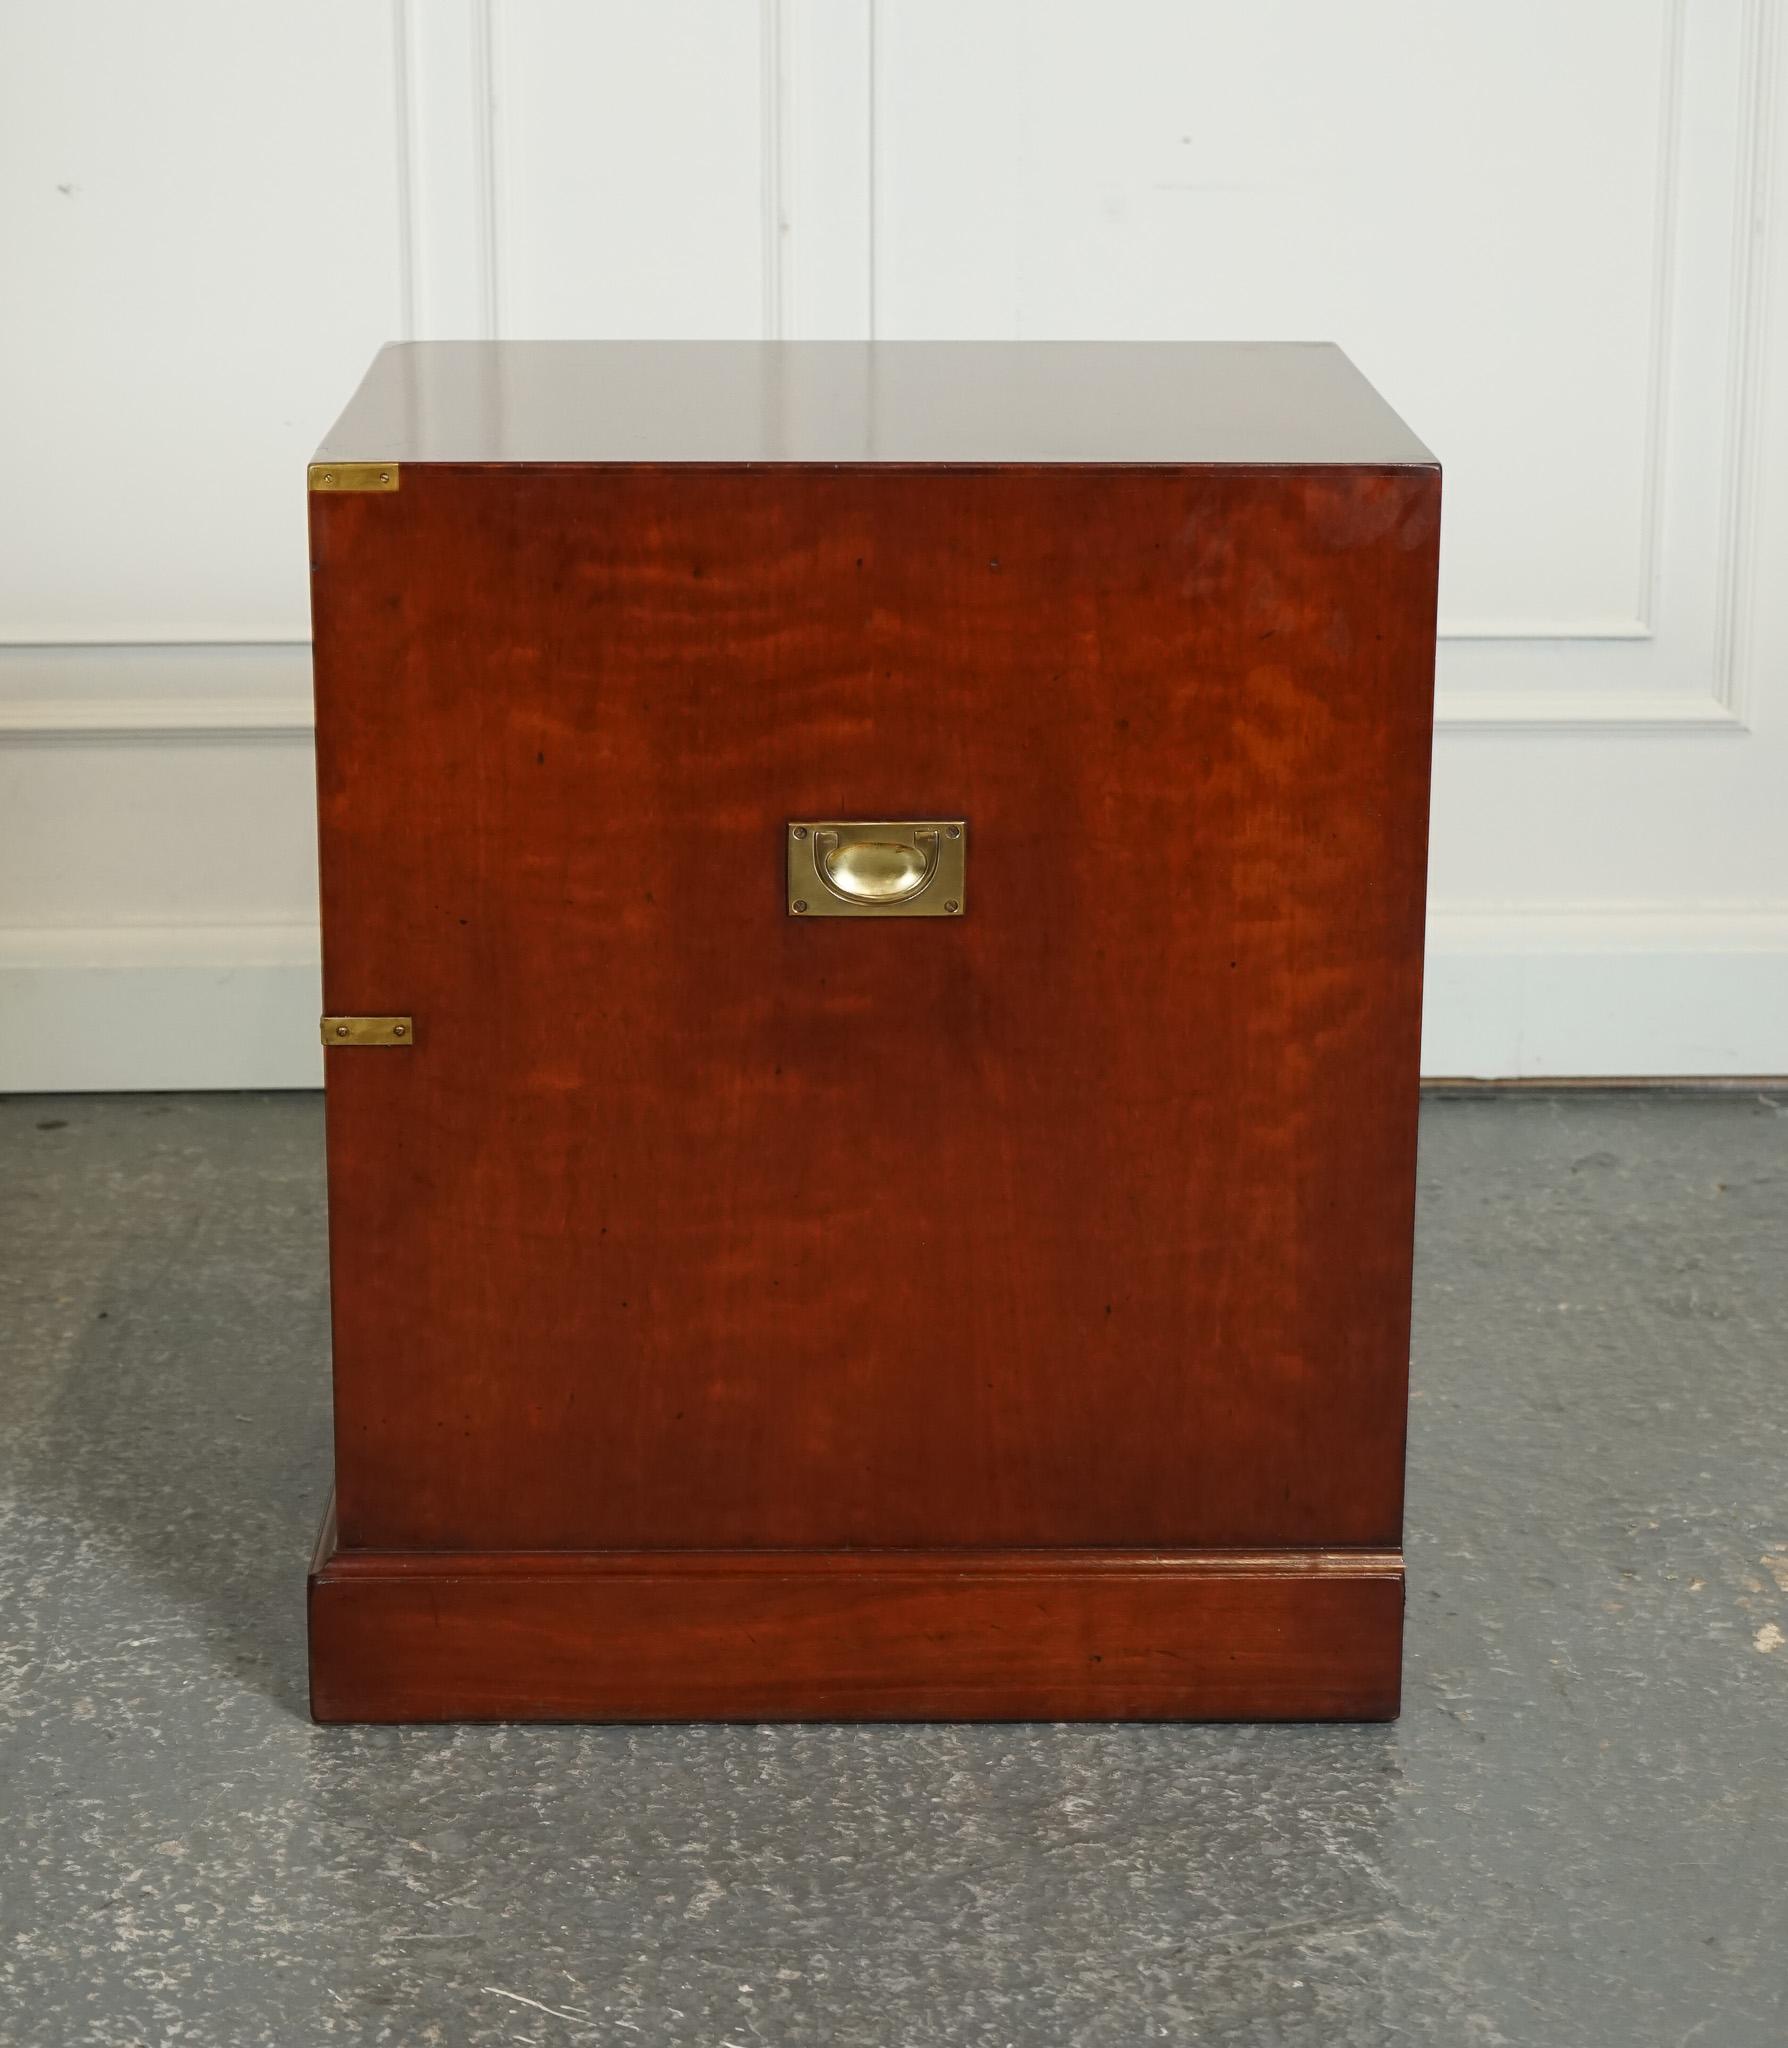 Brass KENNEDY HARRODS MILiTARY CAMPAIGN OFFICE DRAWERS FILLING CABINET J1 (2/2)